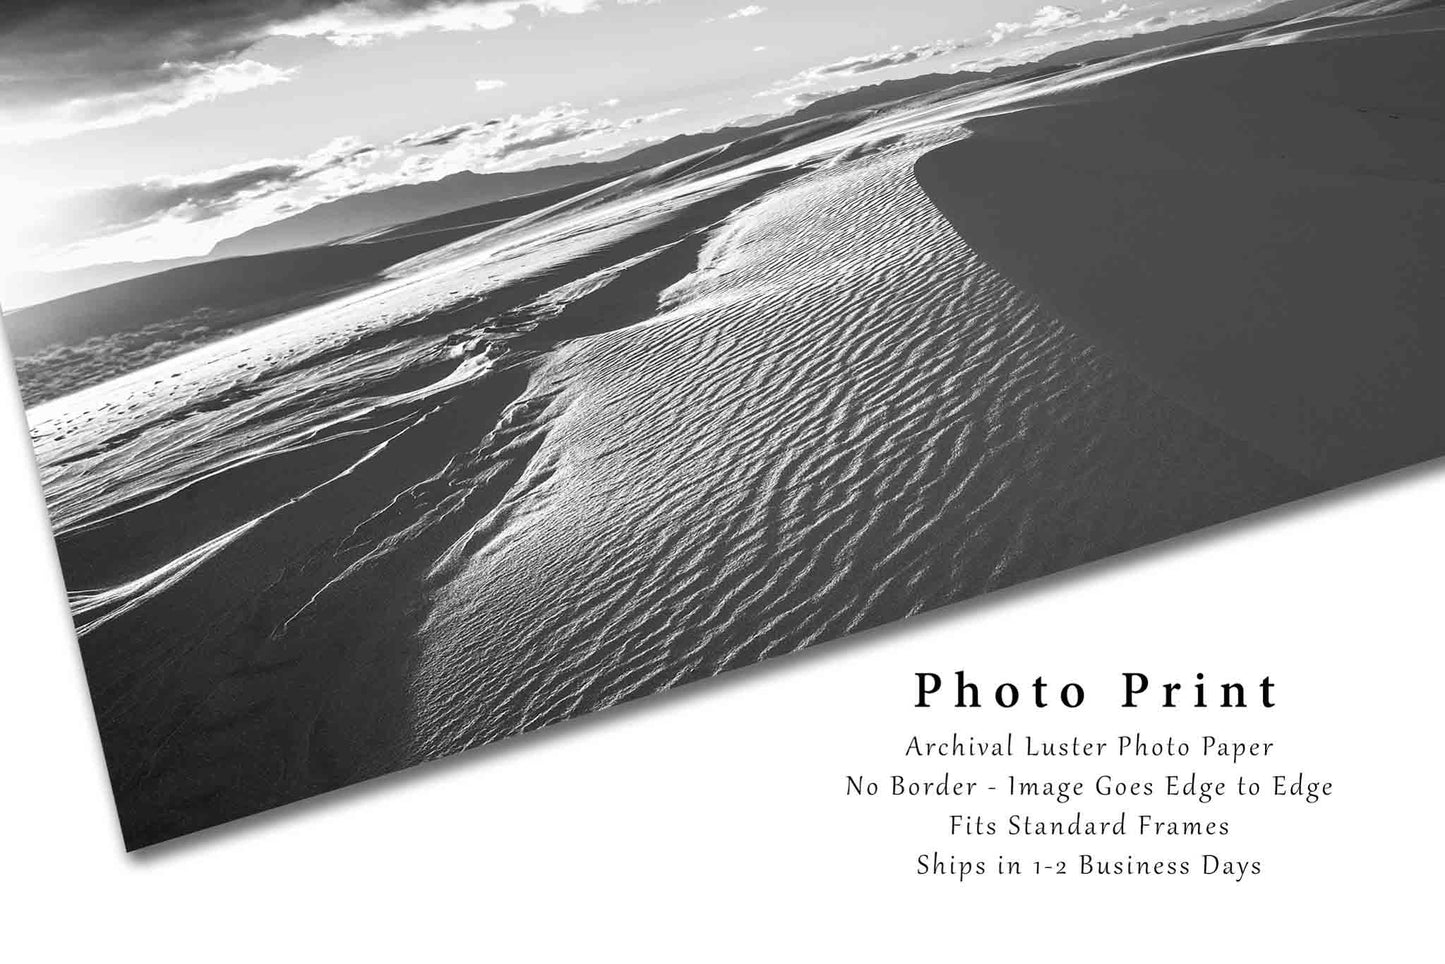 Desert Photography Print - Picture of Sand Dunes at White Sands National Park New Mexico - Black and White Southwestern Wall Art Decor